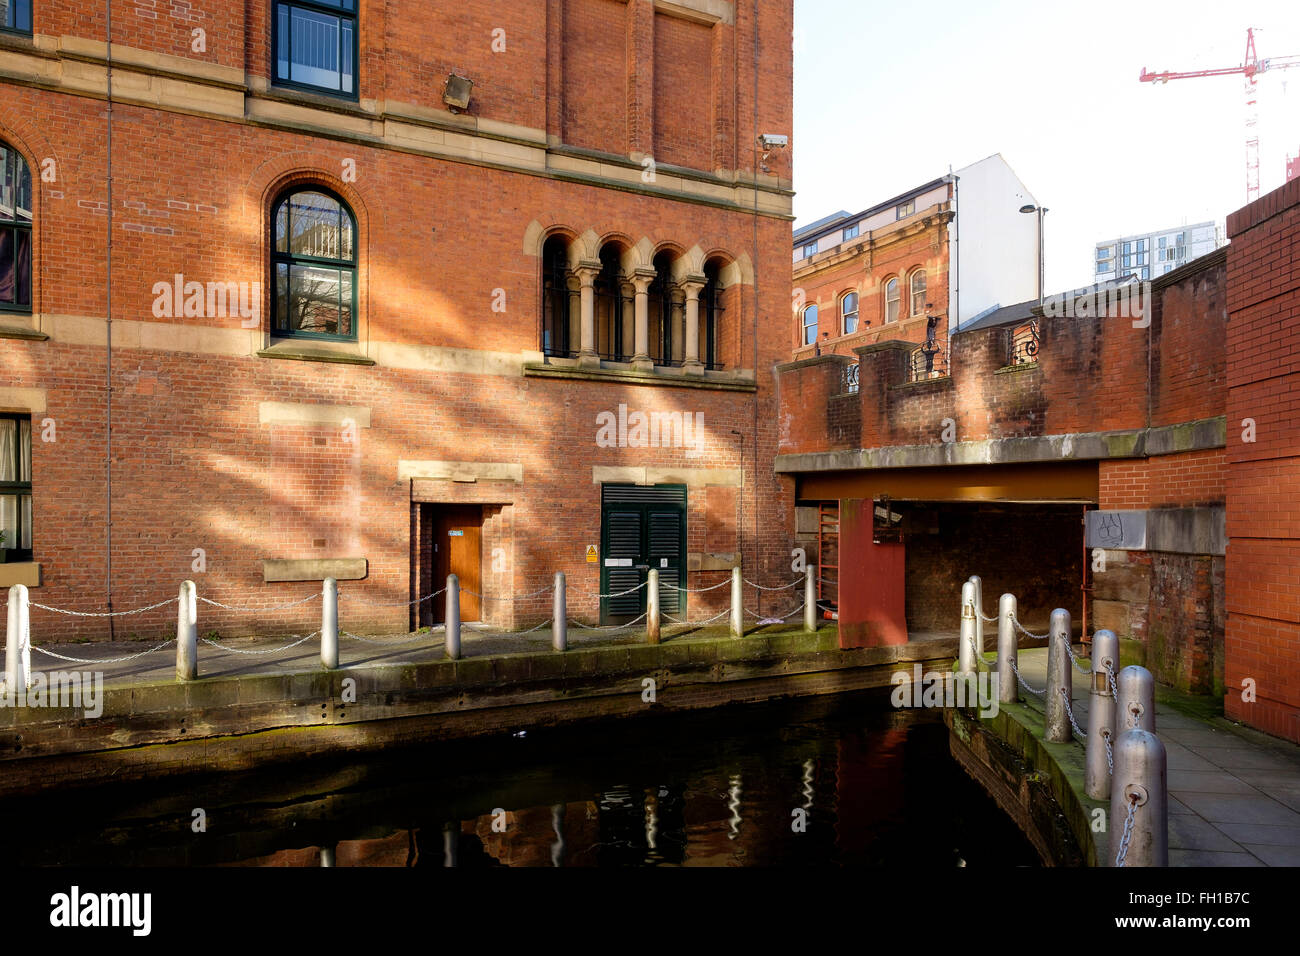 Manchester, UK - 15 February 2016: The narrow entrance through the Great Bridgewater Street to the Barbirolli Square Canal Basin Stock Photo